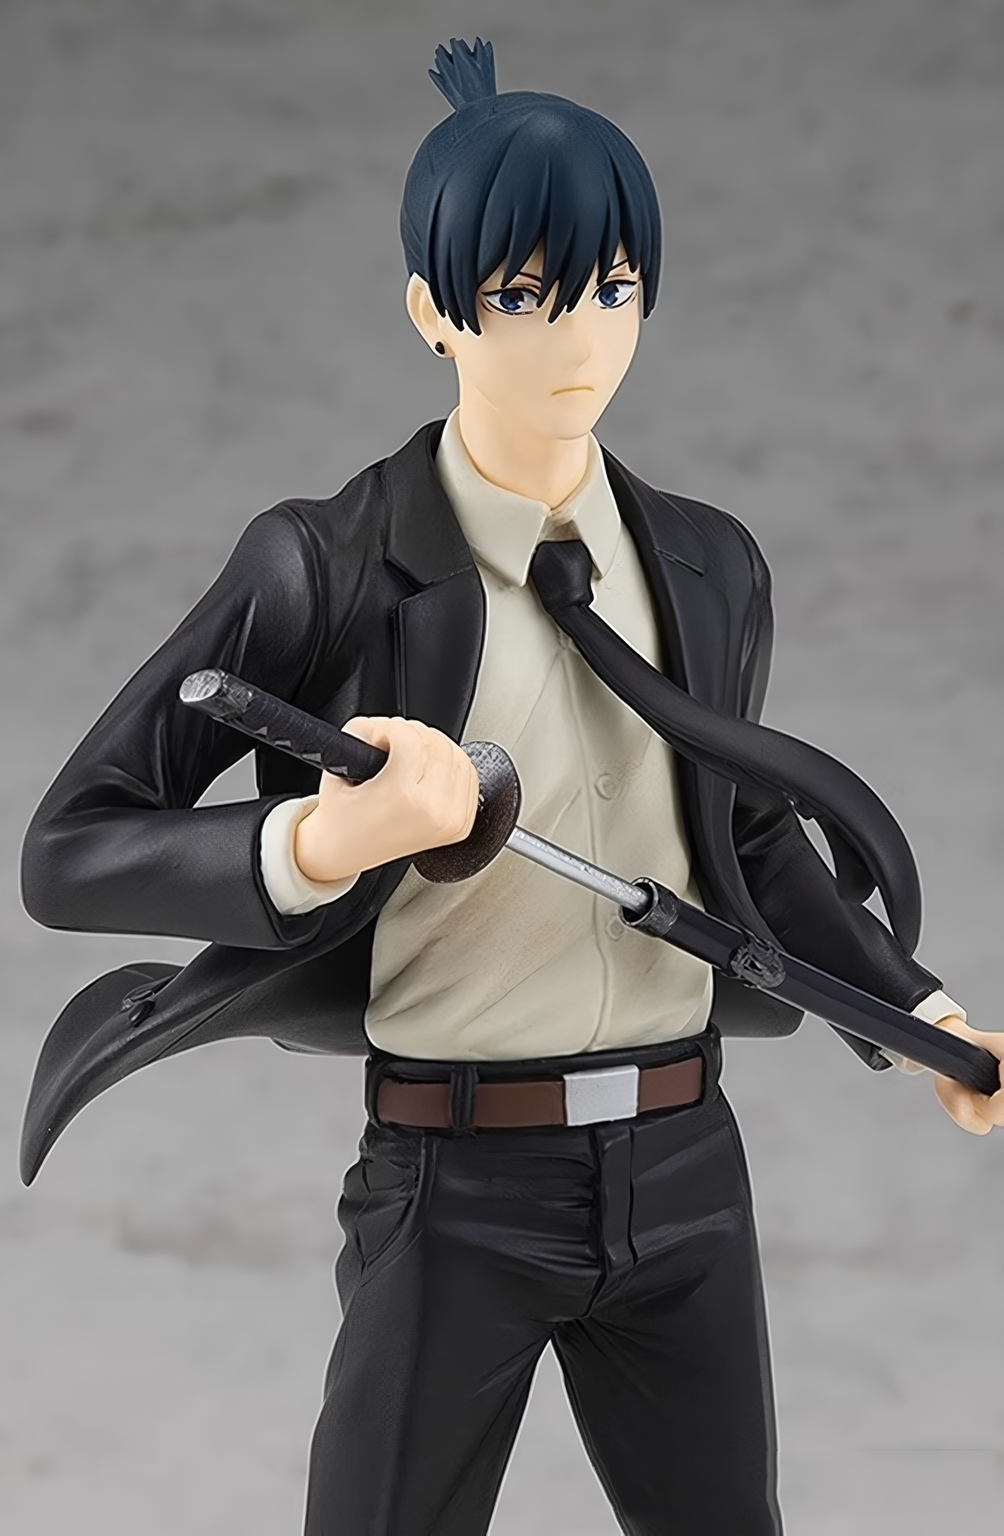 <div><br></div> <div> <p data-mce-fragment="1">Unleash your inner adventurer with Aki Hayakawa - Chainsaw Man figurine.</p> <p data-mce-fragment="1">This figurine captures the fierce and determined spirit of Aki Hayakawa.&nbsp;</p> <p data-mce-fragment="1">Add it to your collection and feel the excitement of the Chainsaw Man cast in your own home!</p> </div>